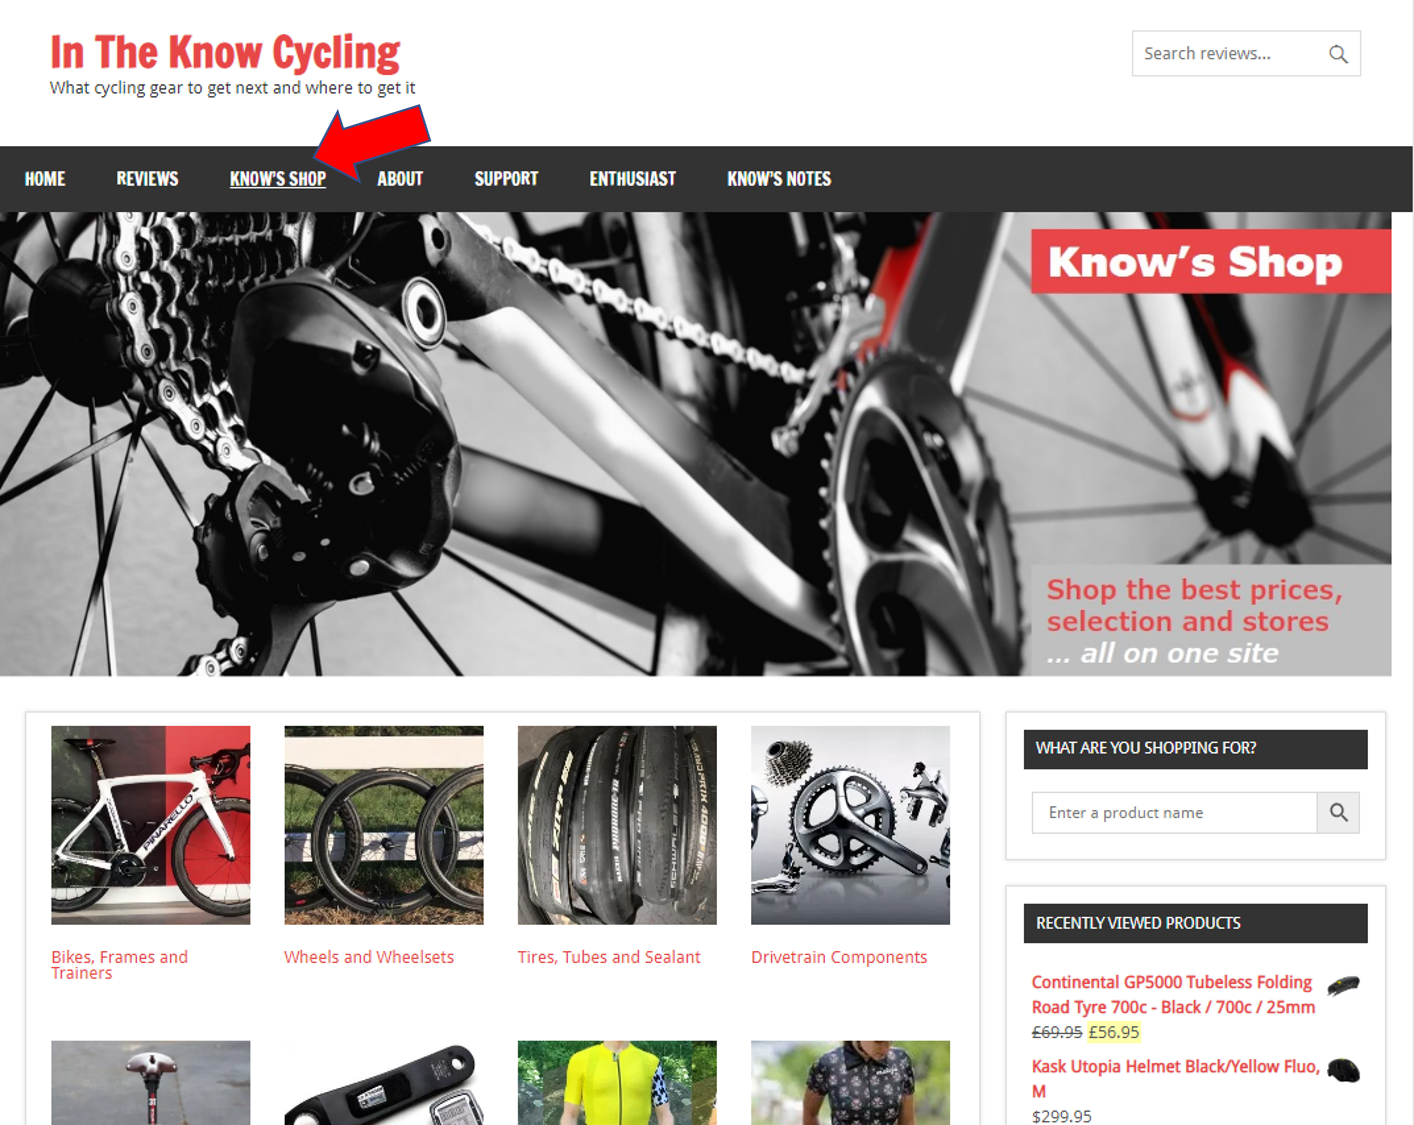 KNOWS SHOP - THE BEST BIKE DEALS FROM THE BEST STORES